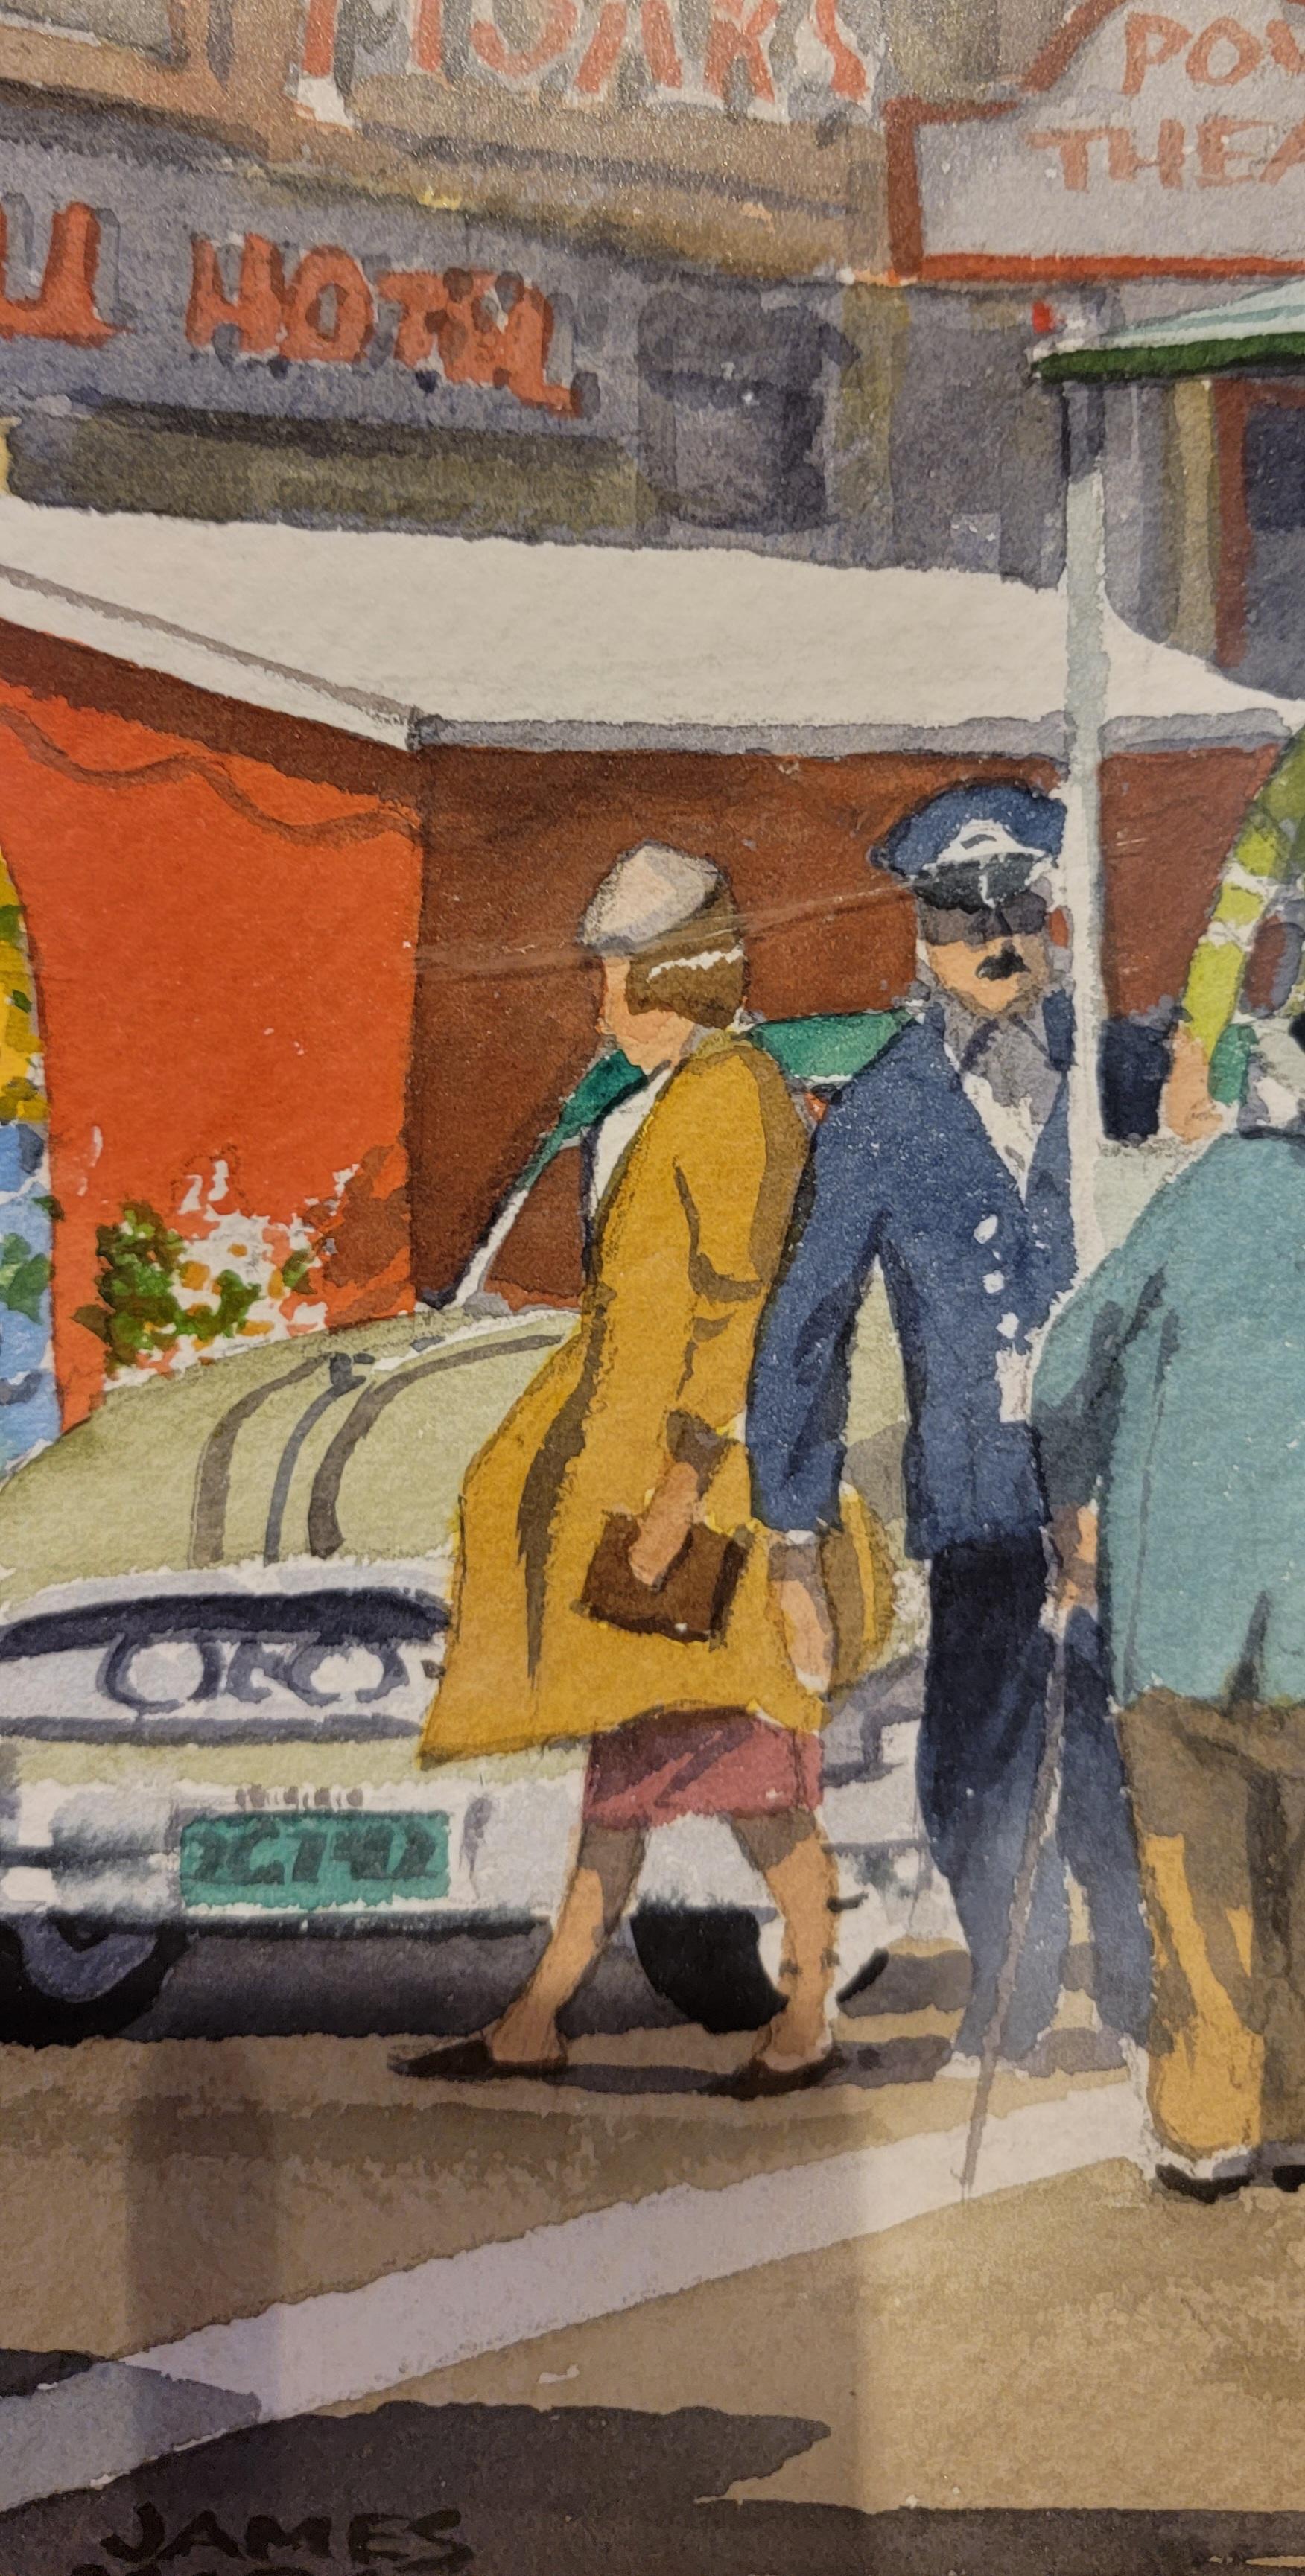 Exceptional original watercolor painting of a street scene in San Francisco, California by James March Phillips. Amazing subject matter including the famous San Francisco cable car, a 1949 Pontiac, ladies and gentlemen in appropriate period attire.